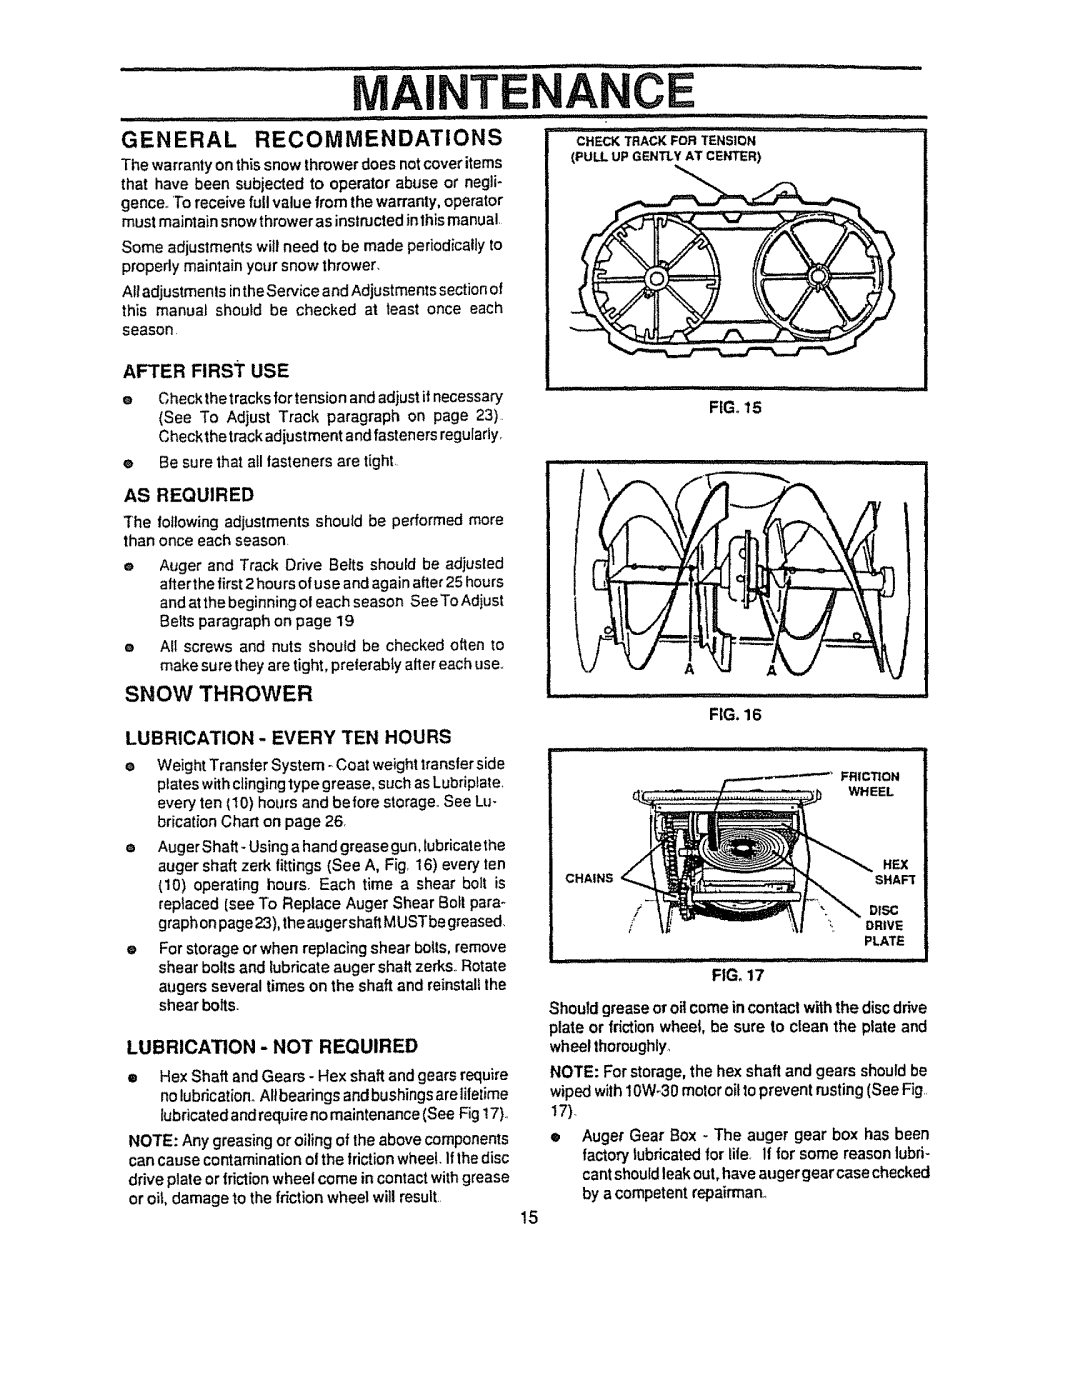 Sears 536.884821 manual Maintenance, General Recommendations, Snow Thrower 